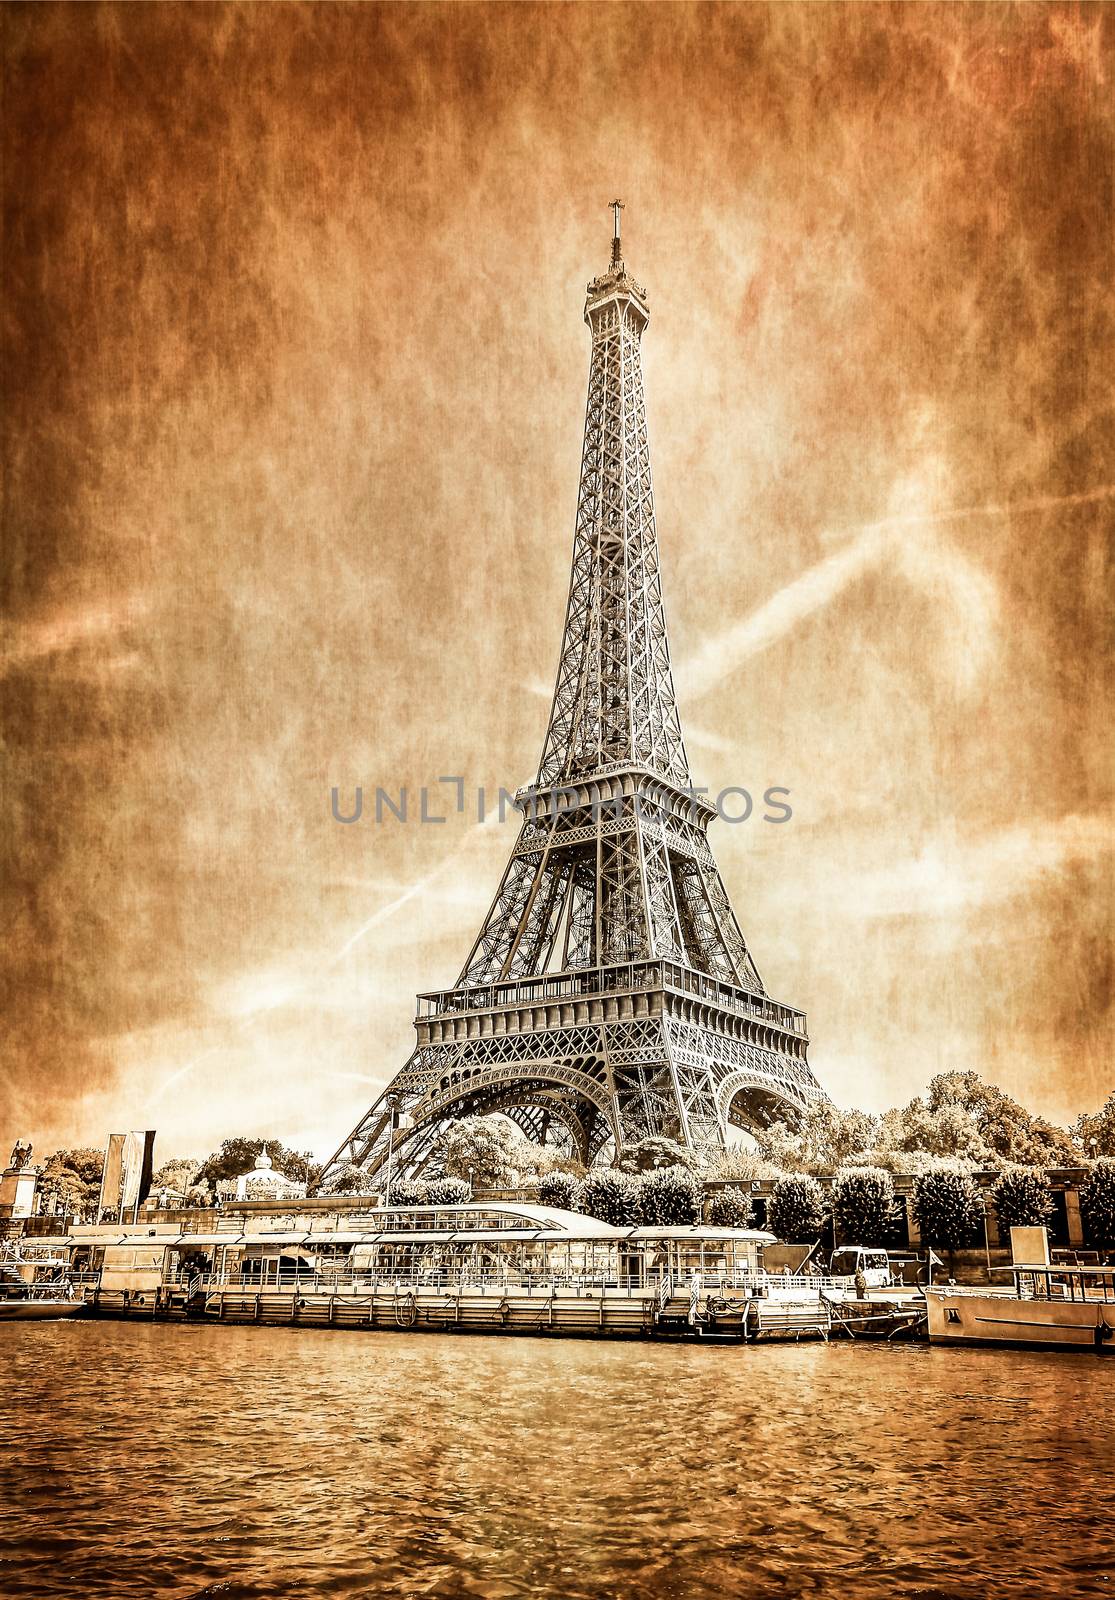 View of Eiffel tower in vintage filtered and textured style, Paris, France